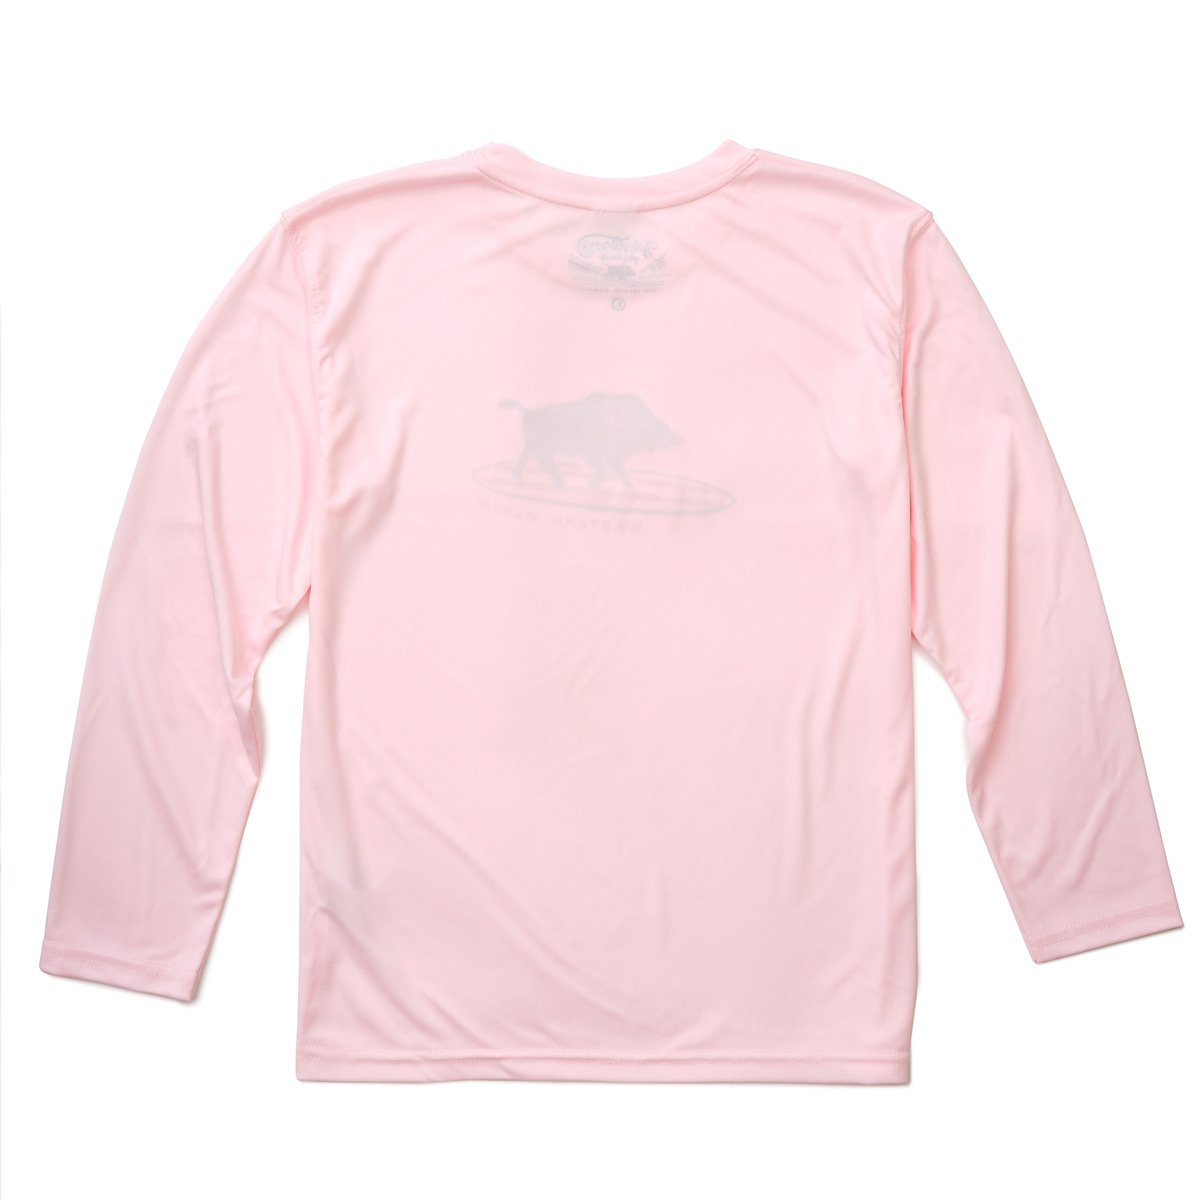 YOUTH SURFING BOAR PERFORMANCE TEE - PINK